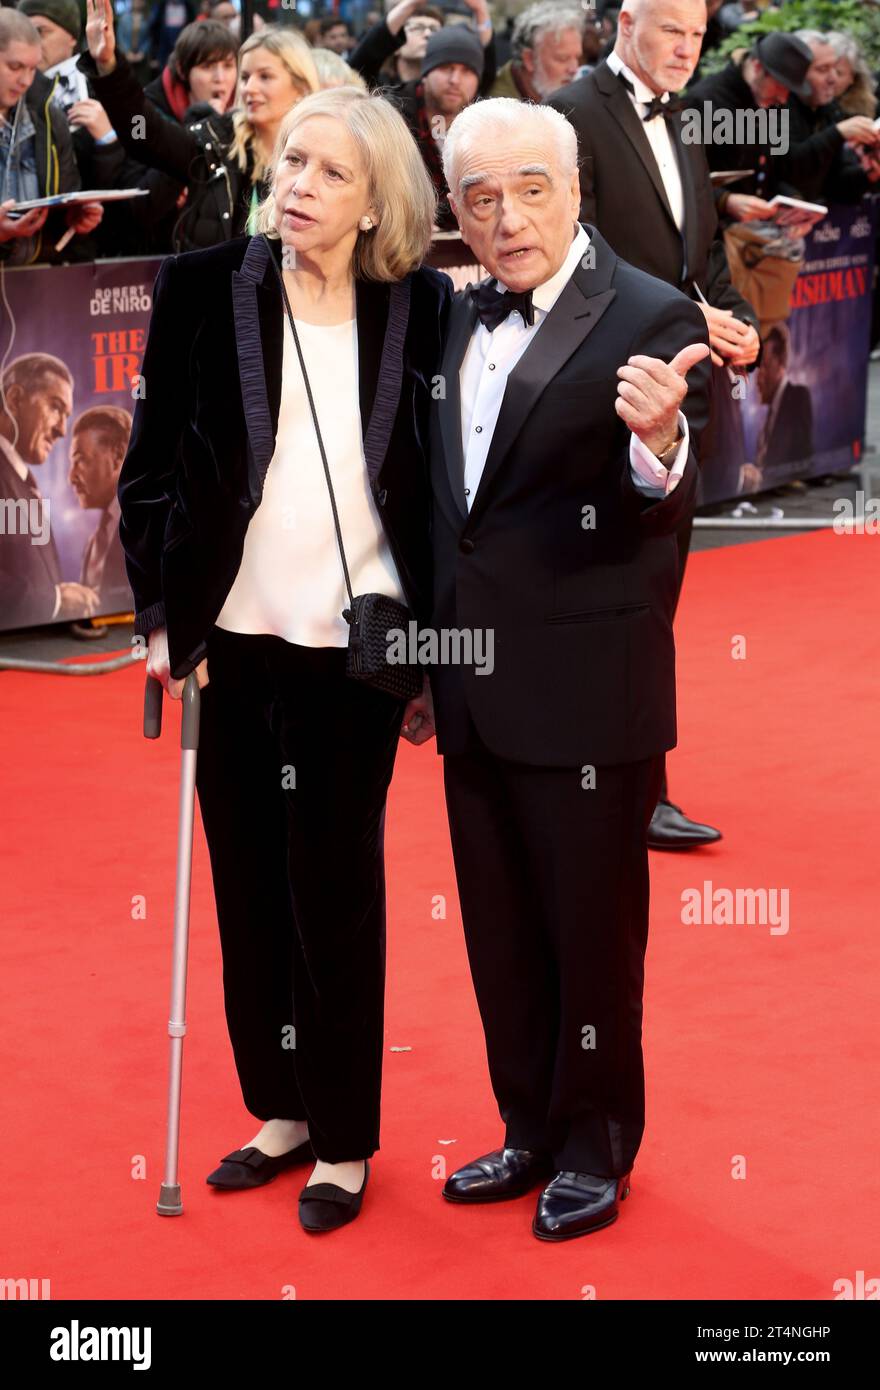 Martin Scorsese (R) and Helen Morris (L) attend  the international film premiere of 'The Irishman' at Odeon Luxe Leicester Square in London. Stock Photo